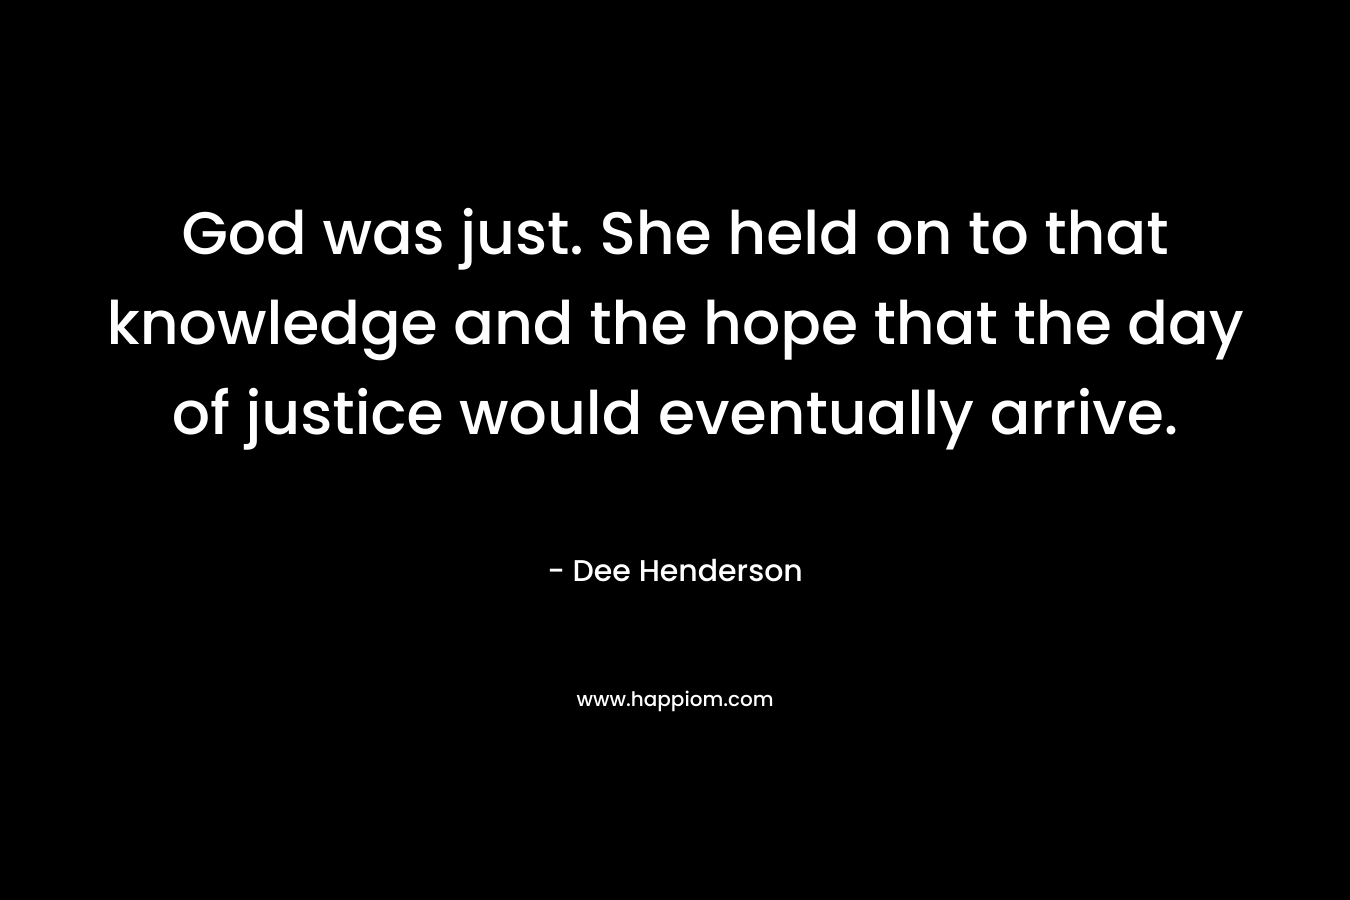 God was just. She held on to that knowledge and the hope that the day of justice would eventually arrive. – Dee Henderson